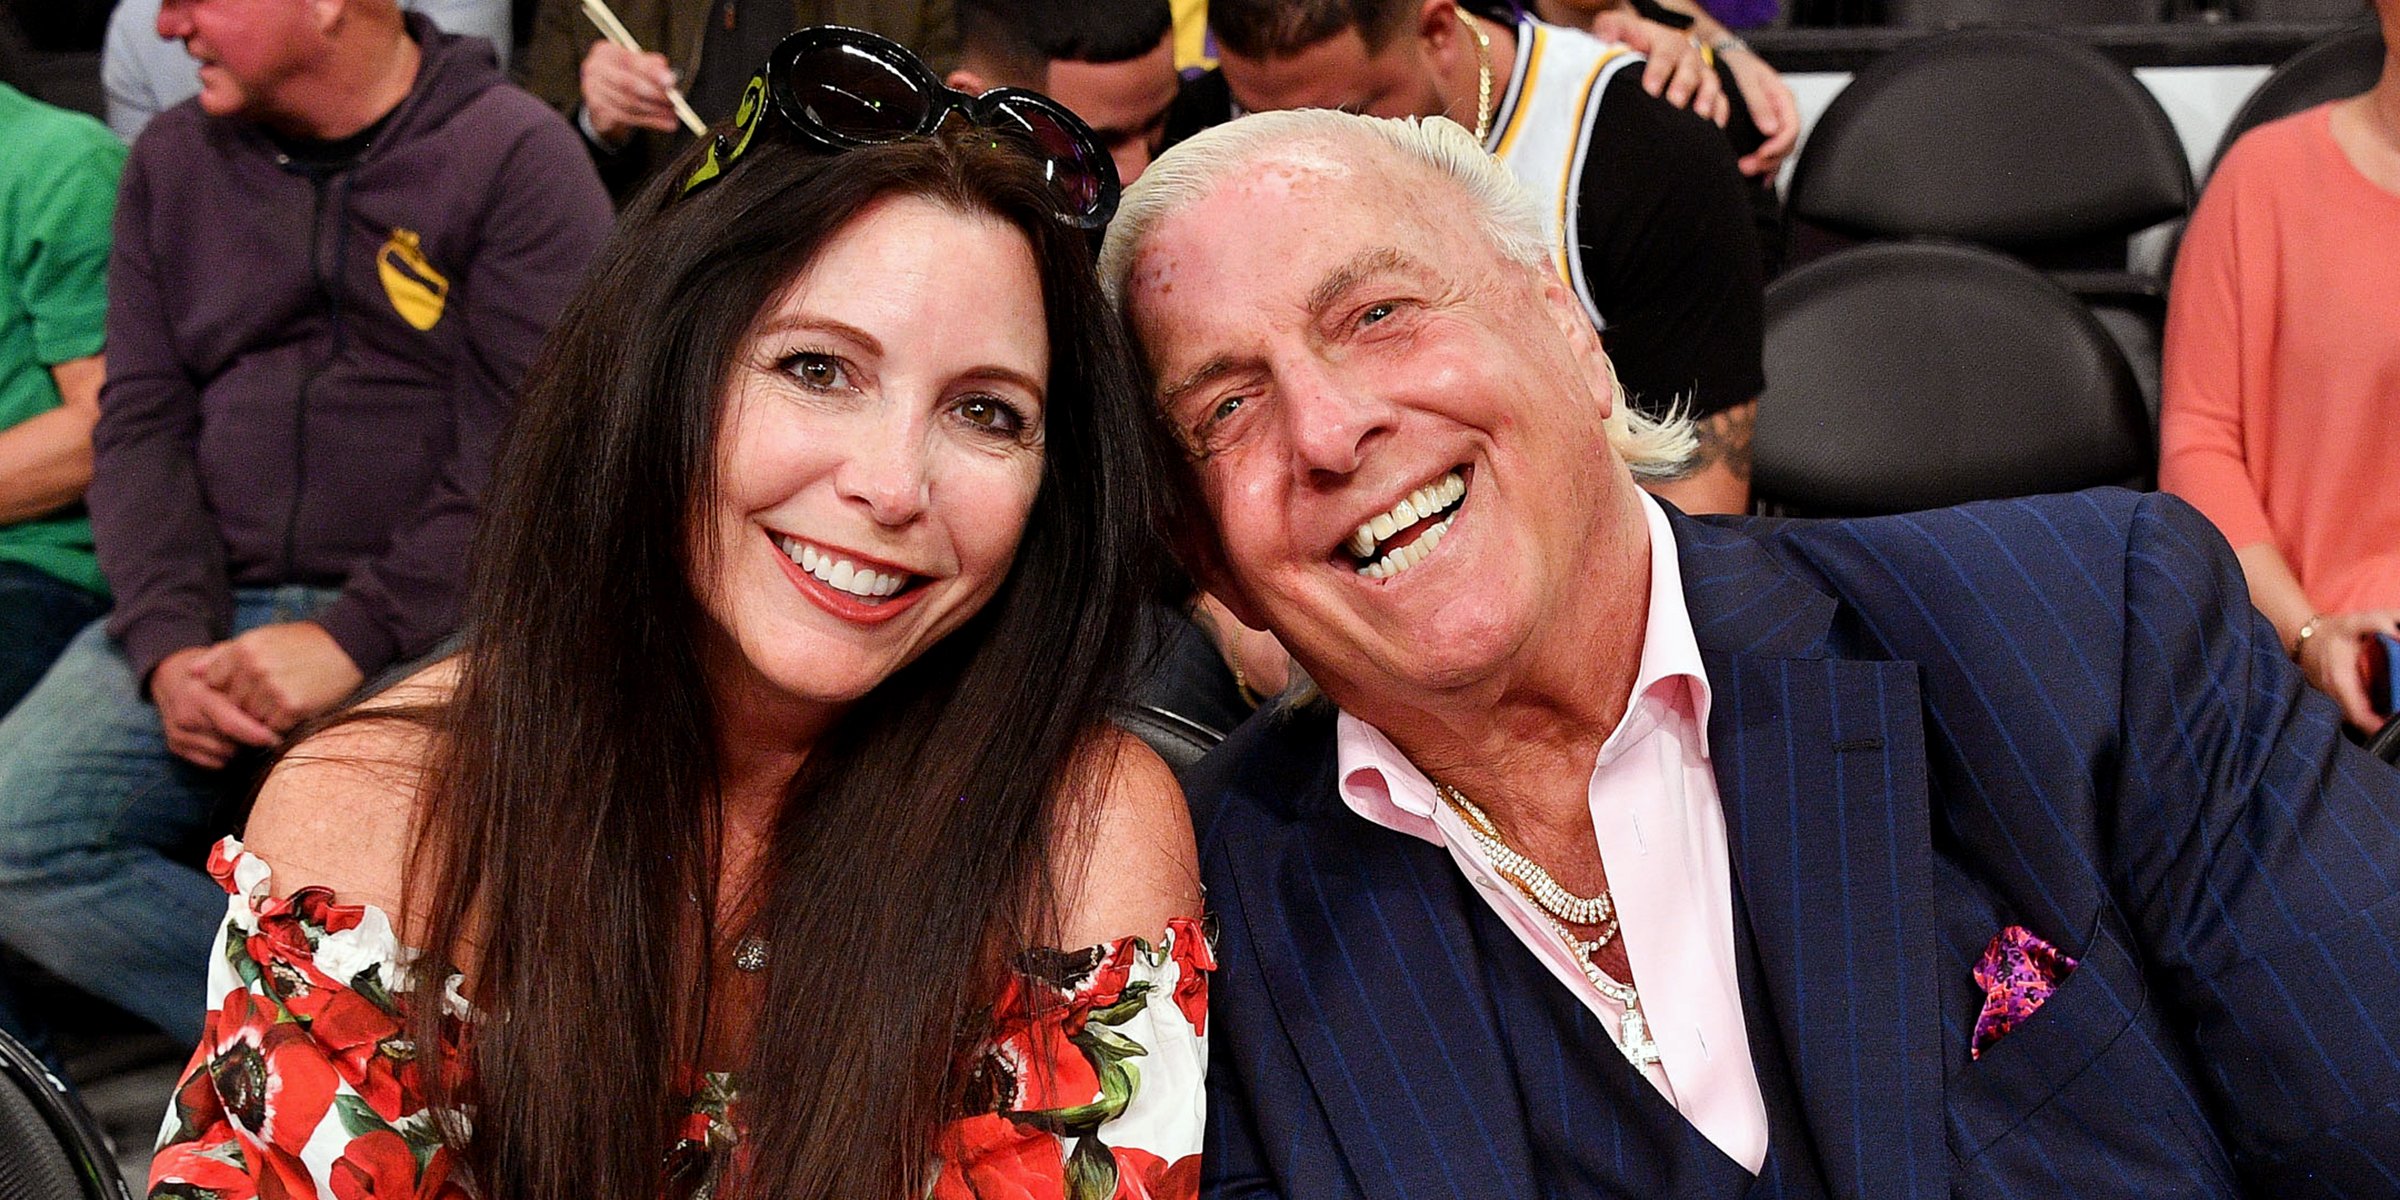 Wendy Barlow and Ric Flair | Source: Getty Images